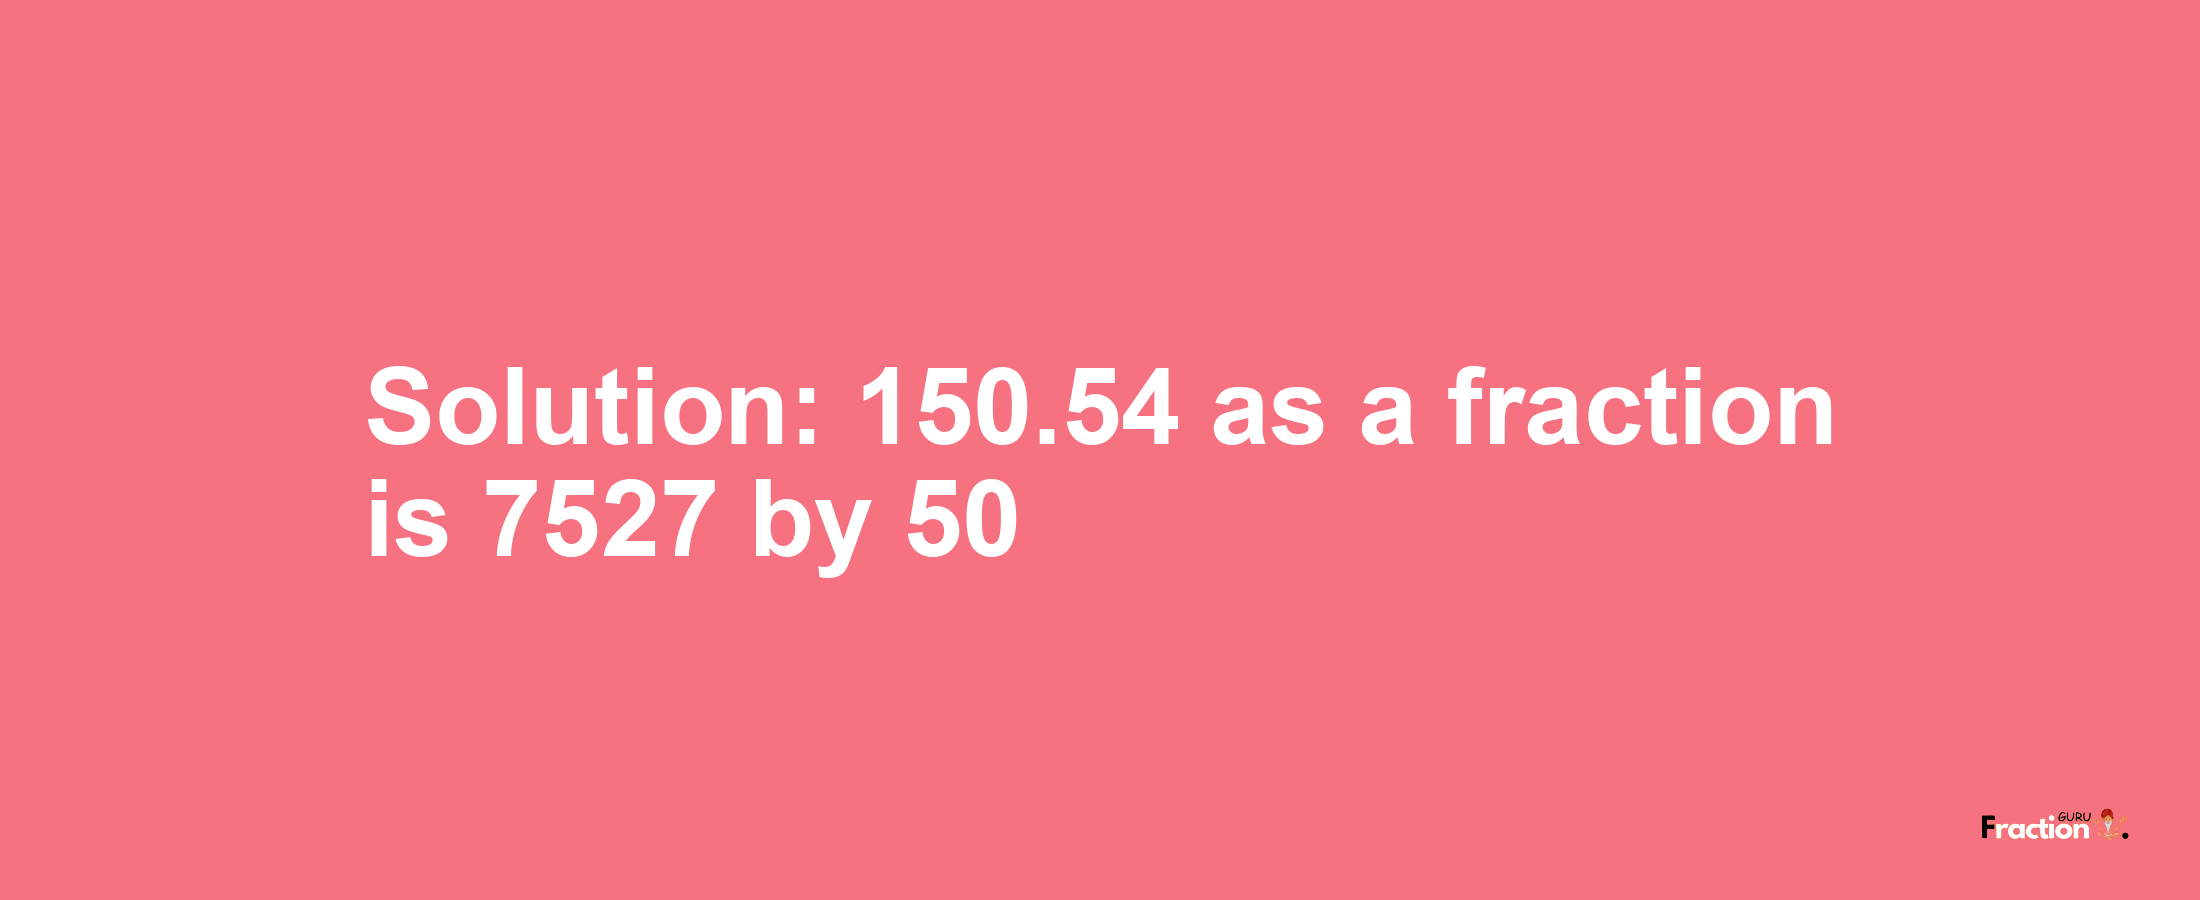 Solution:150.54 as a fraction is 7527/50